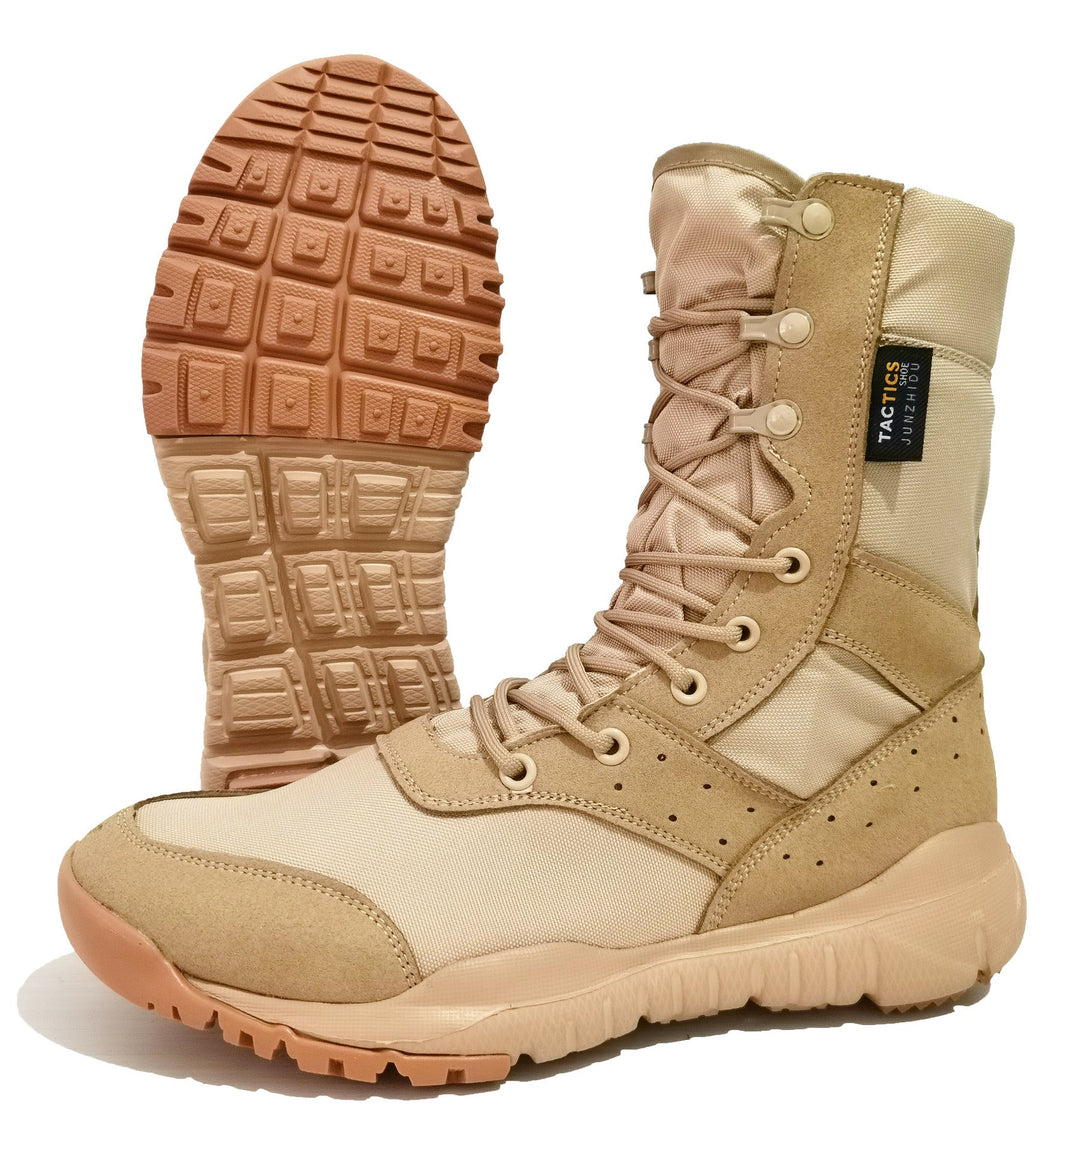 Men's khaki tactical boots outdoors hiking boots High cut military boots